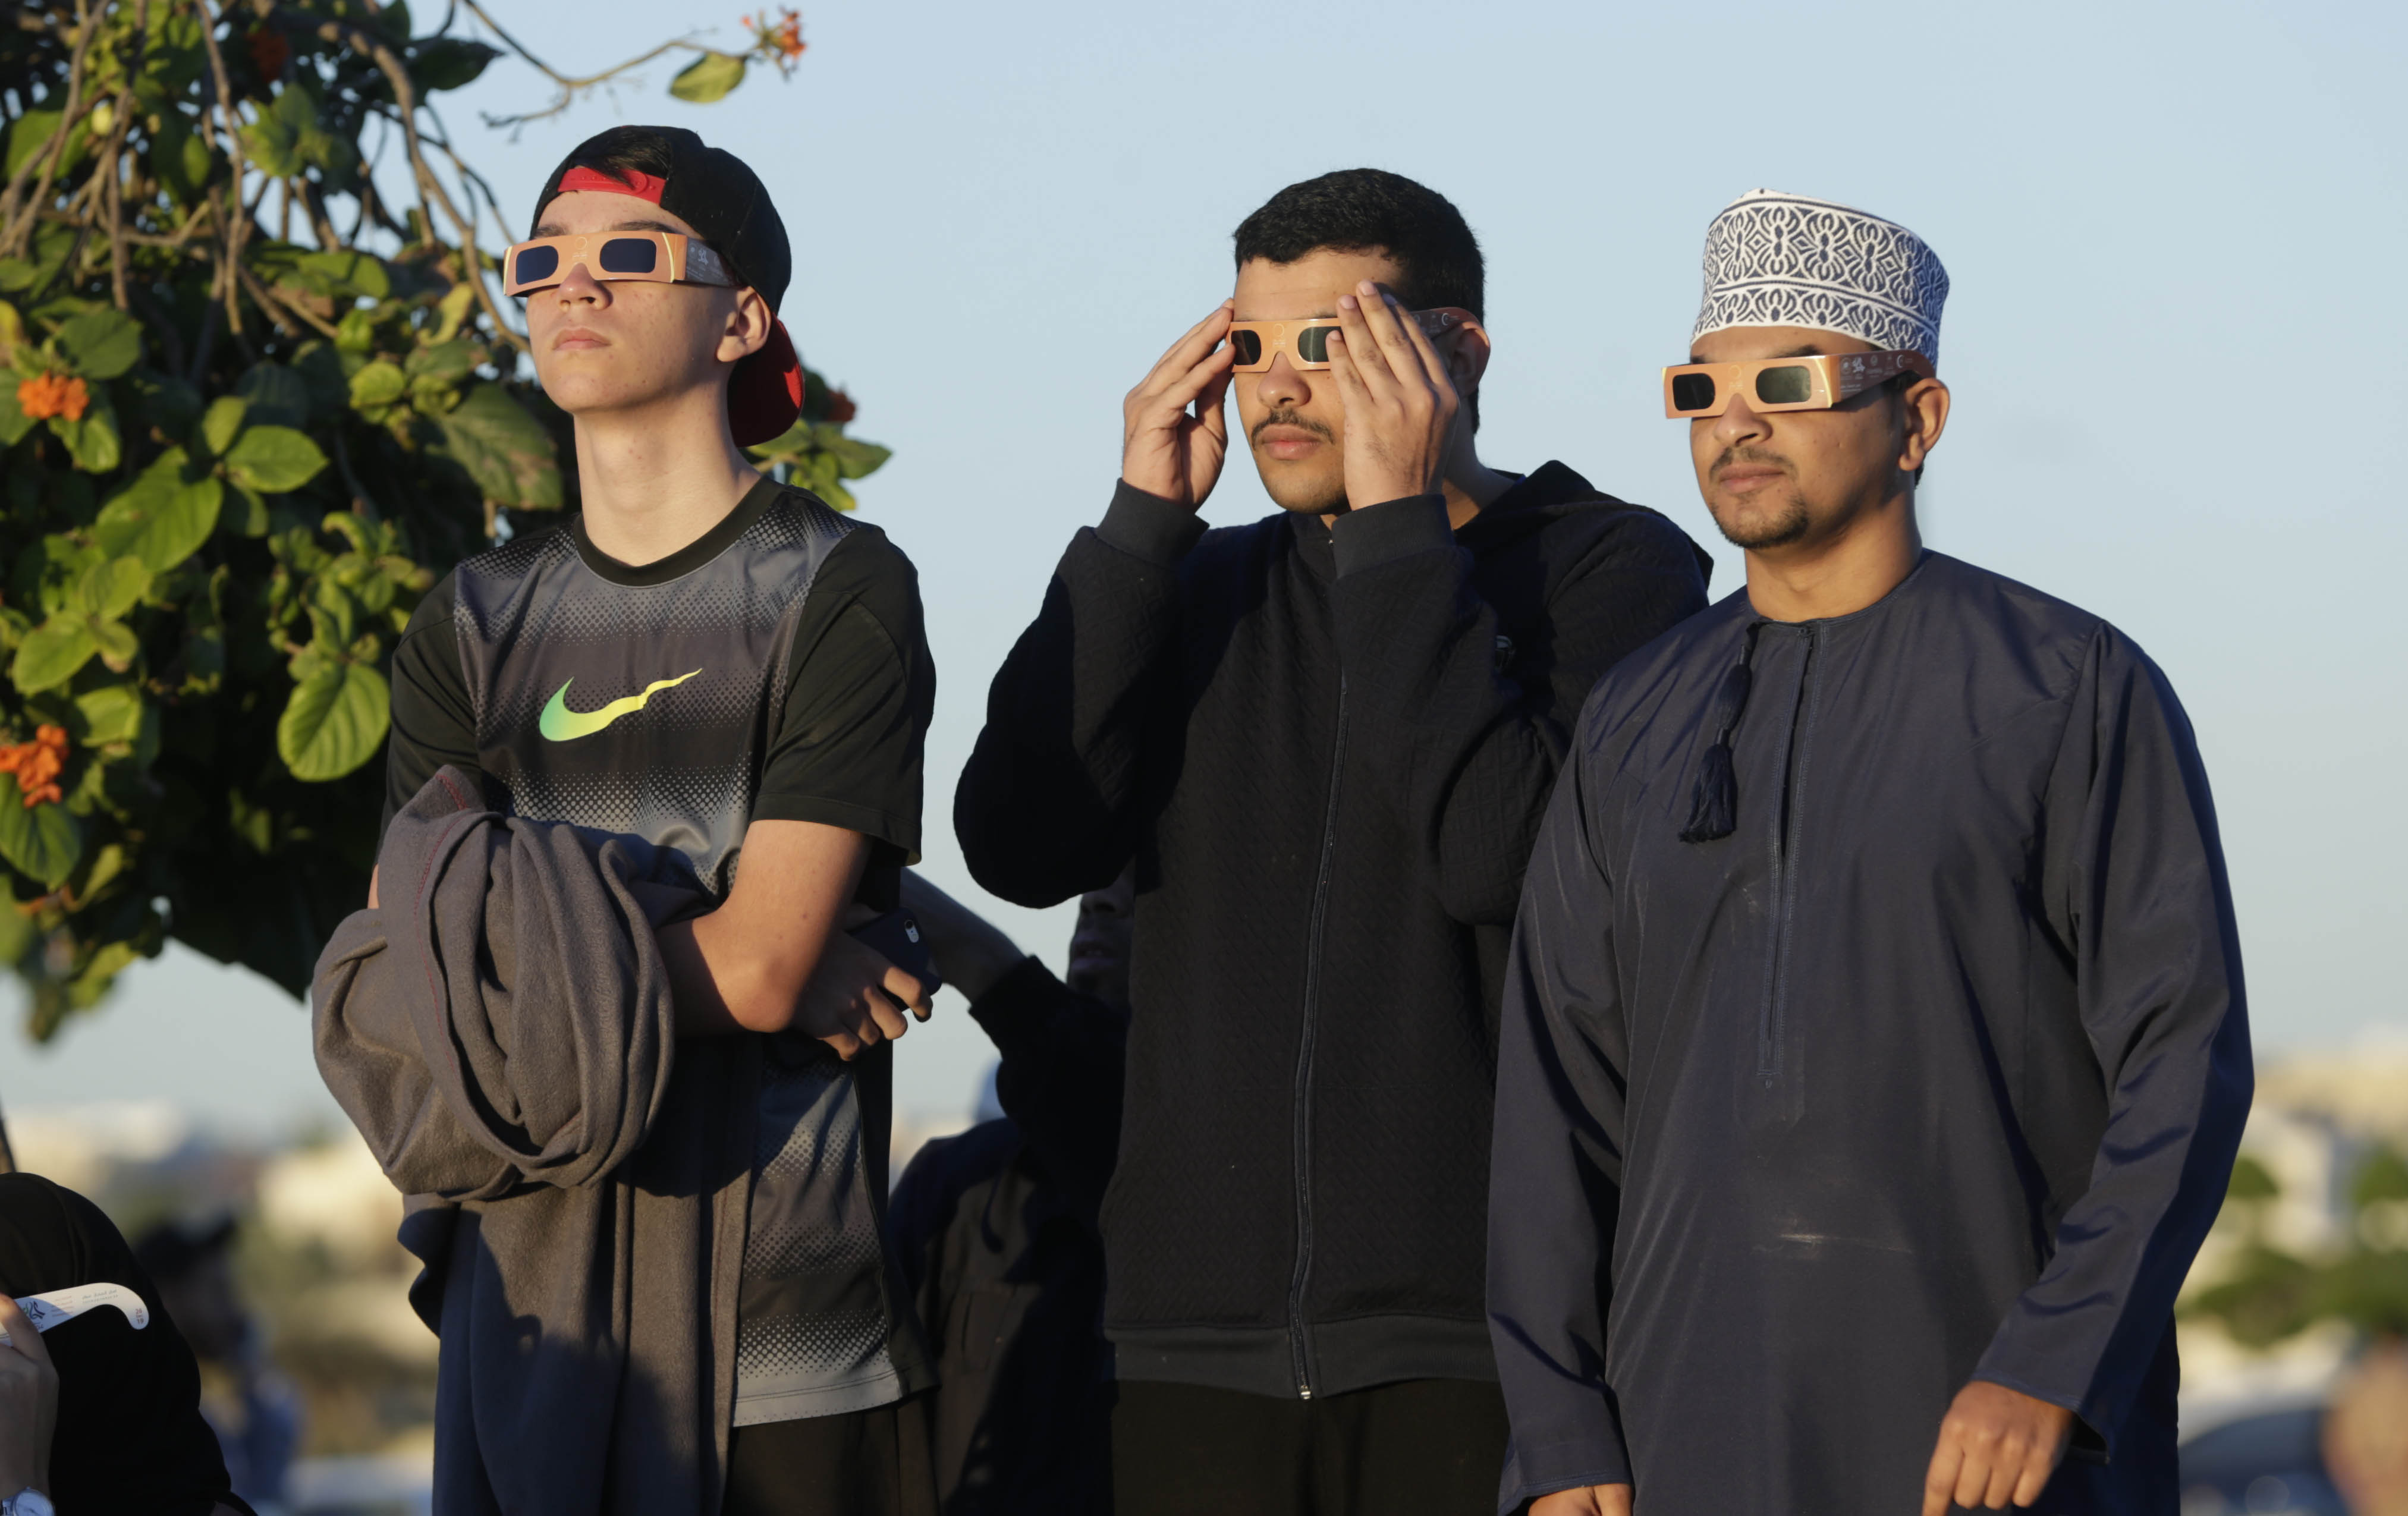 Thousands wake up early to watch solar eclipse in Oman